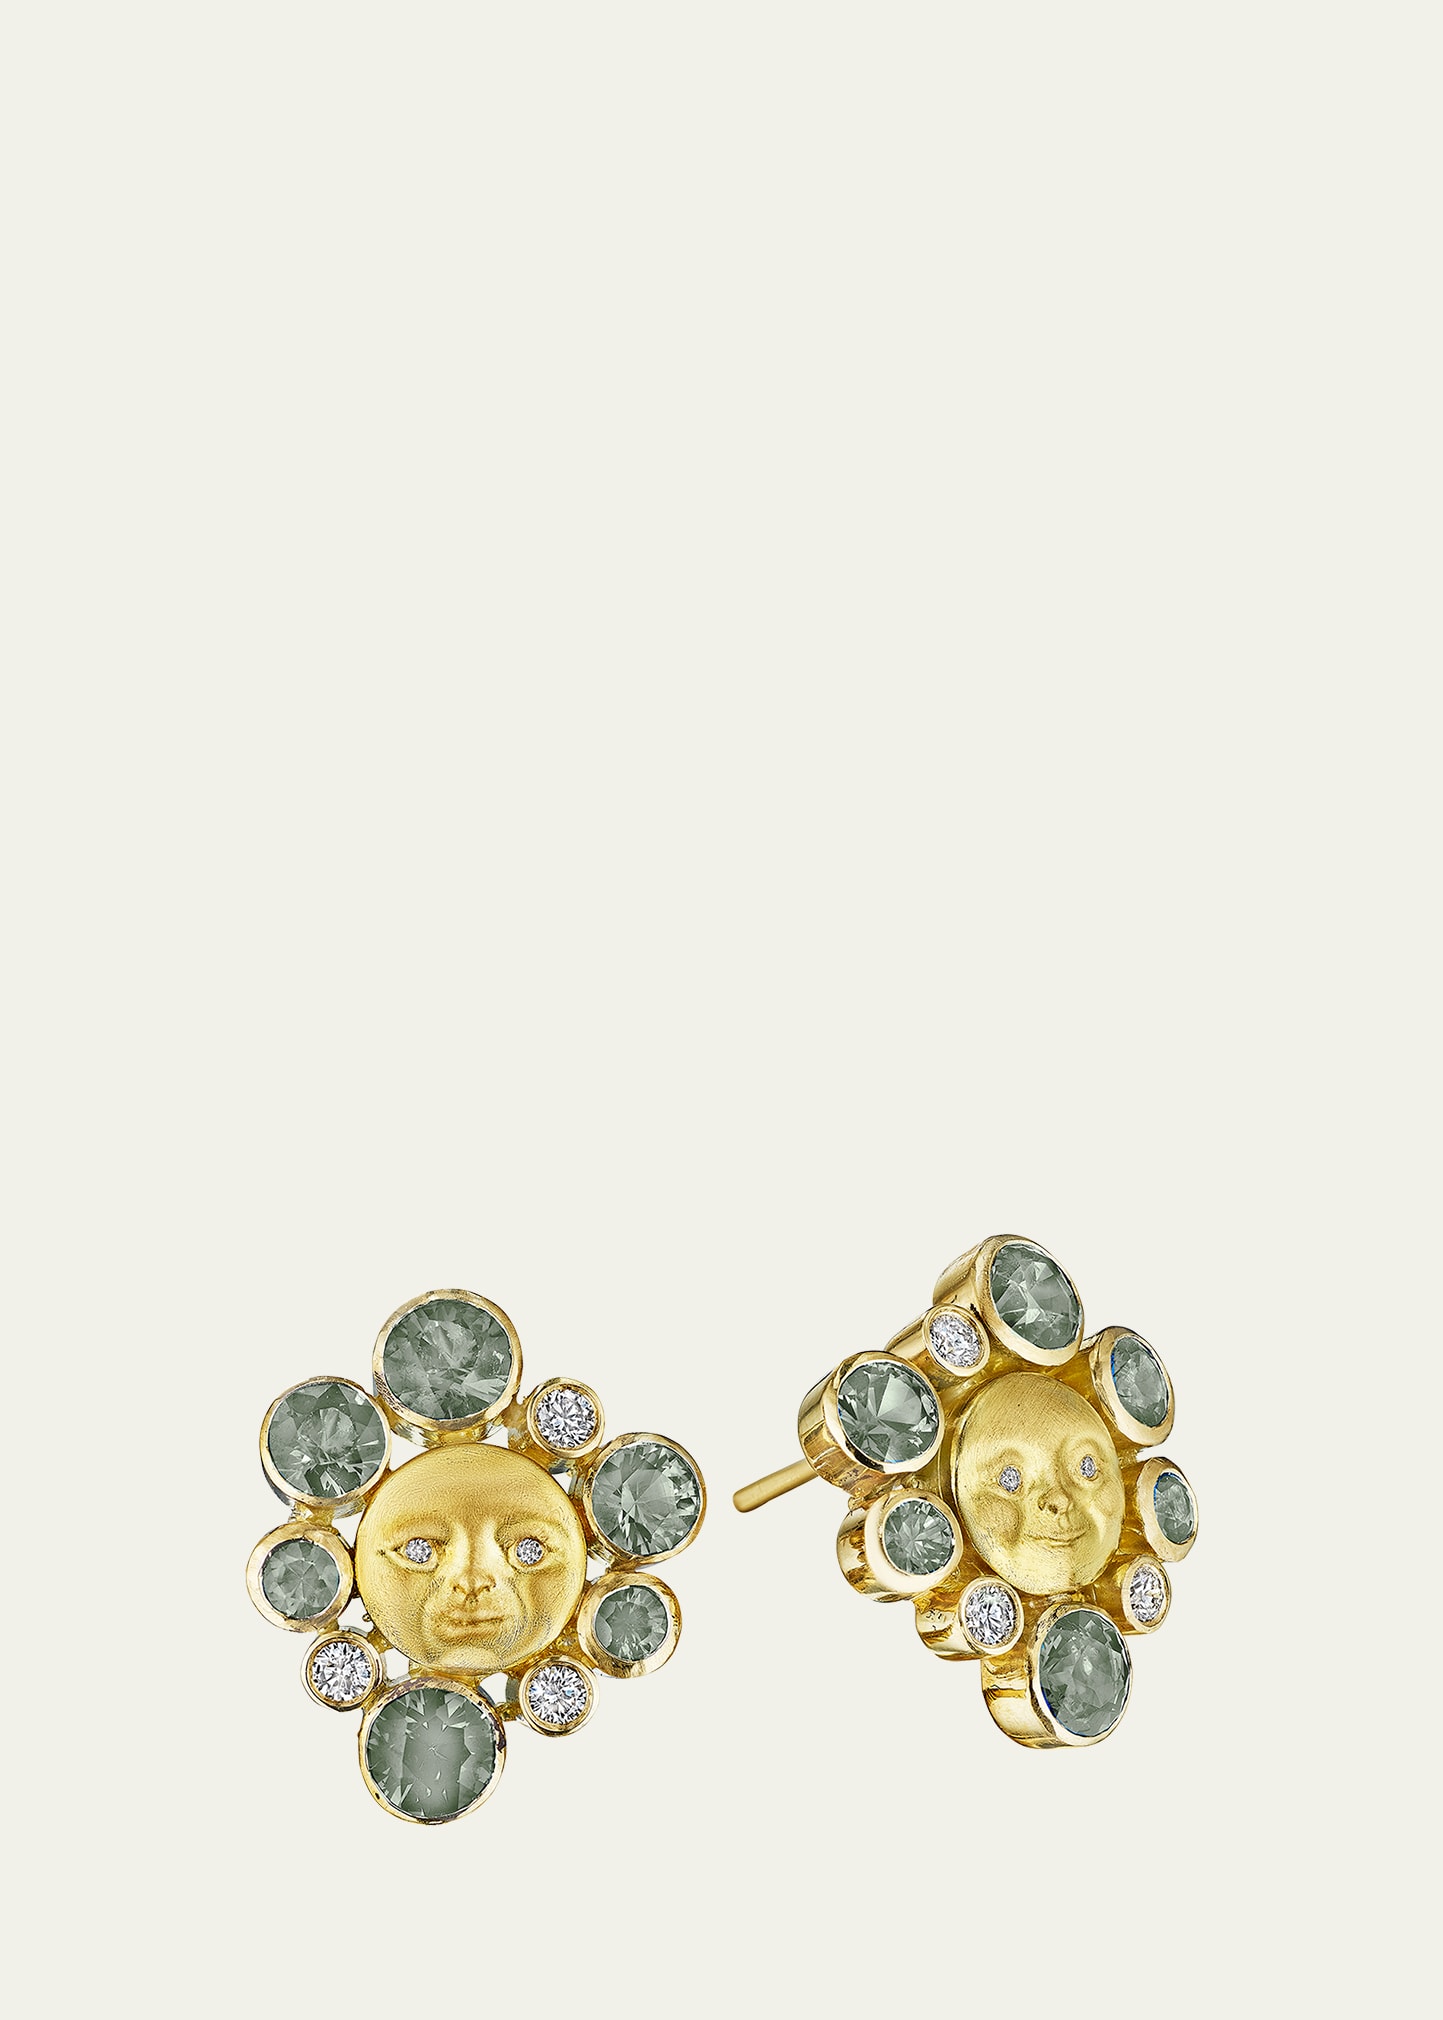 Anthony Lent Lunar Galaxy Button Earrings With Green Sapphires And Diamonds In 18k Gold In Yg